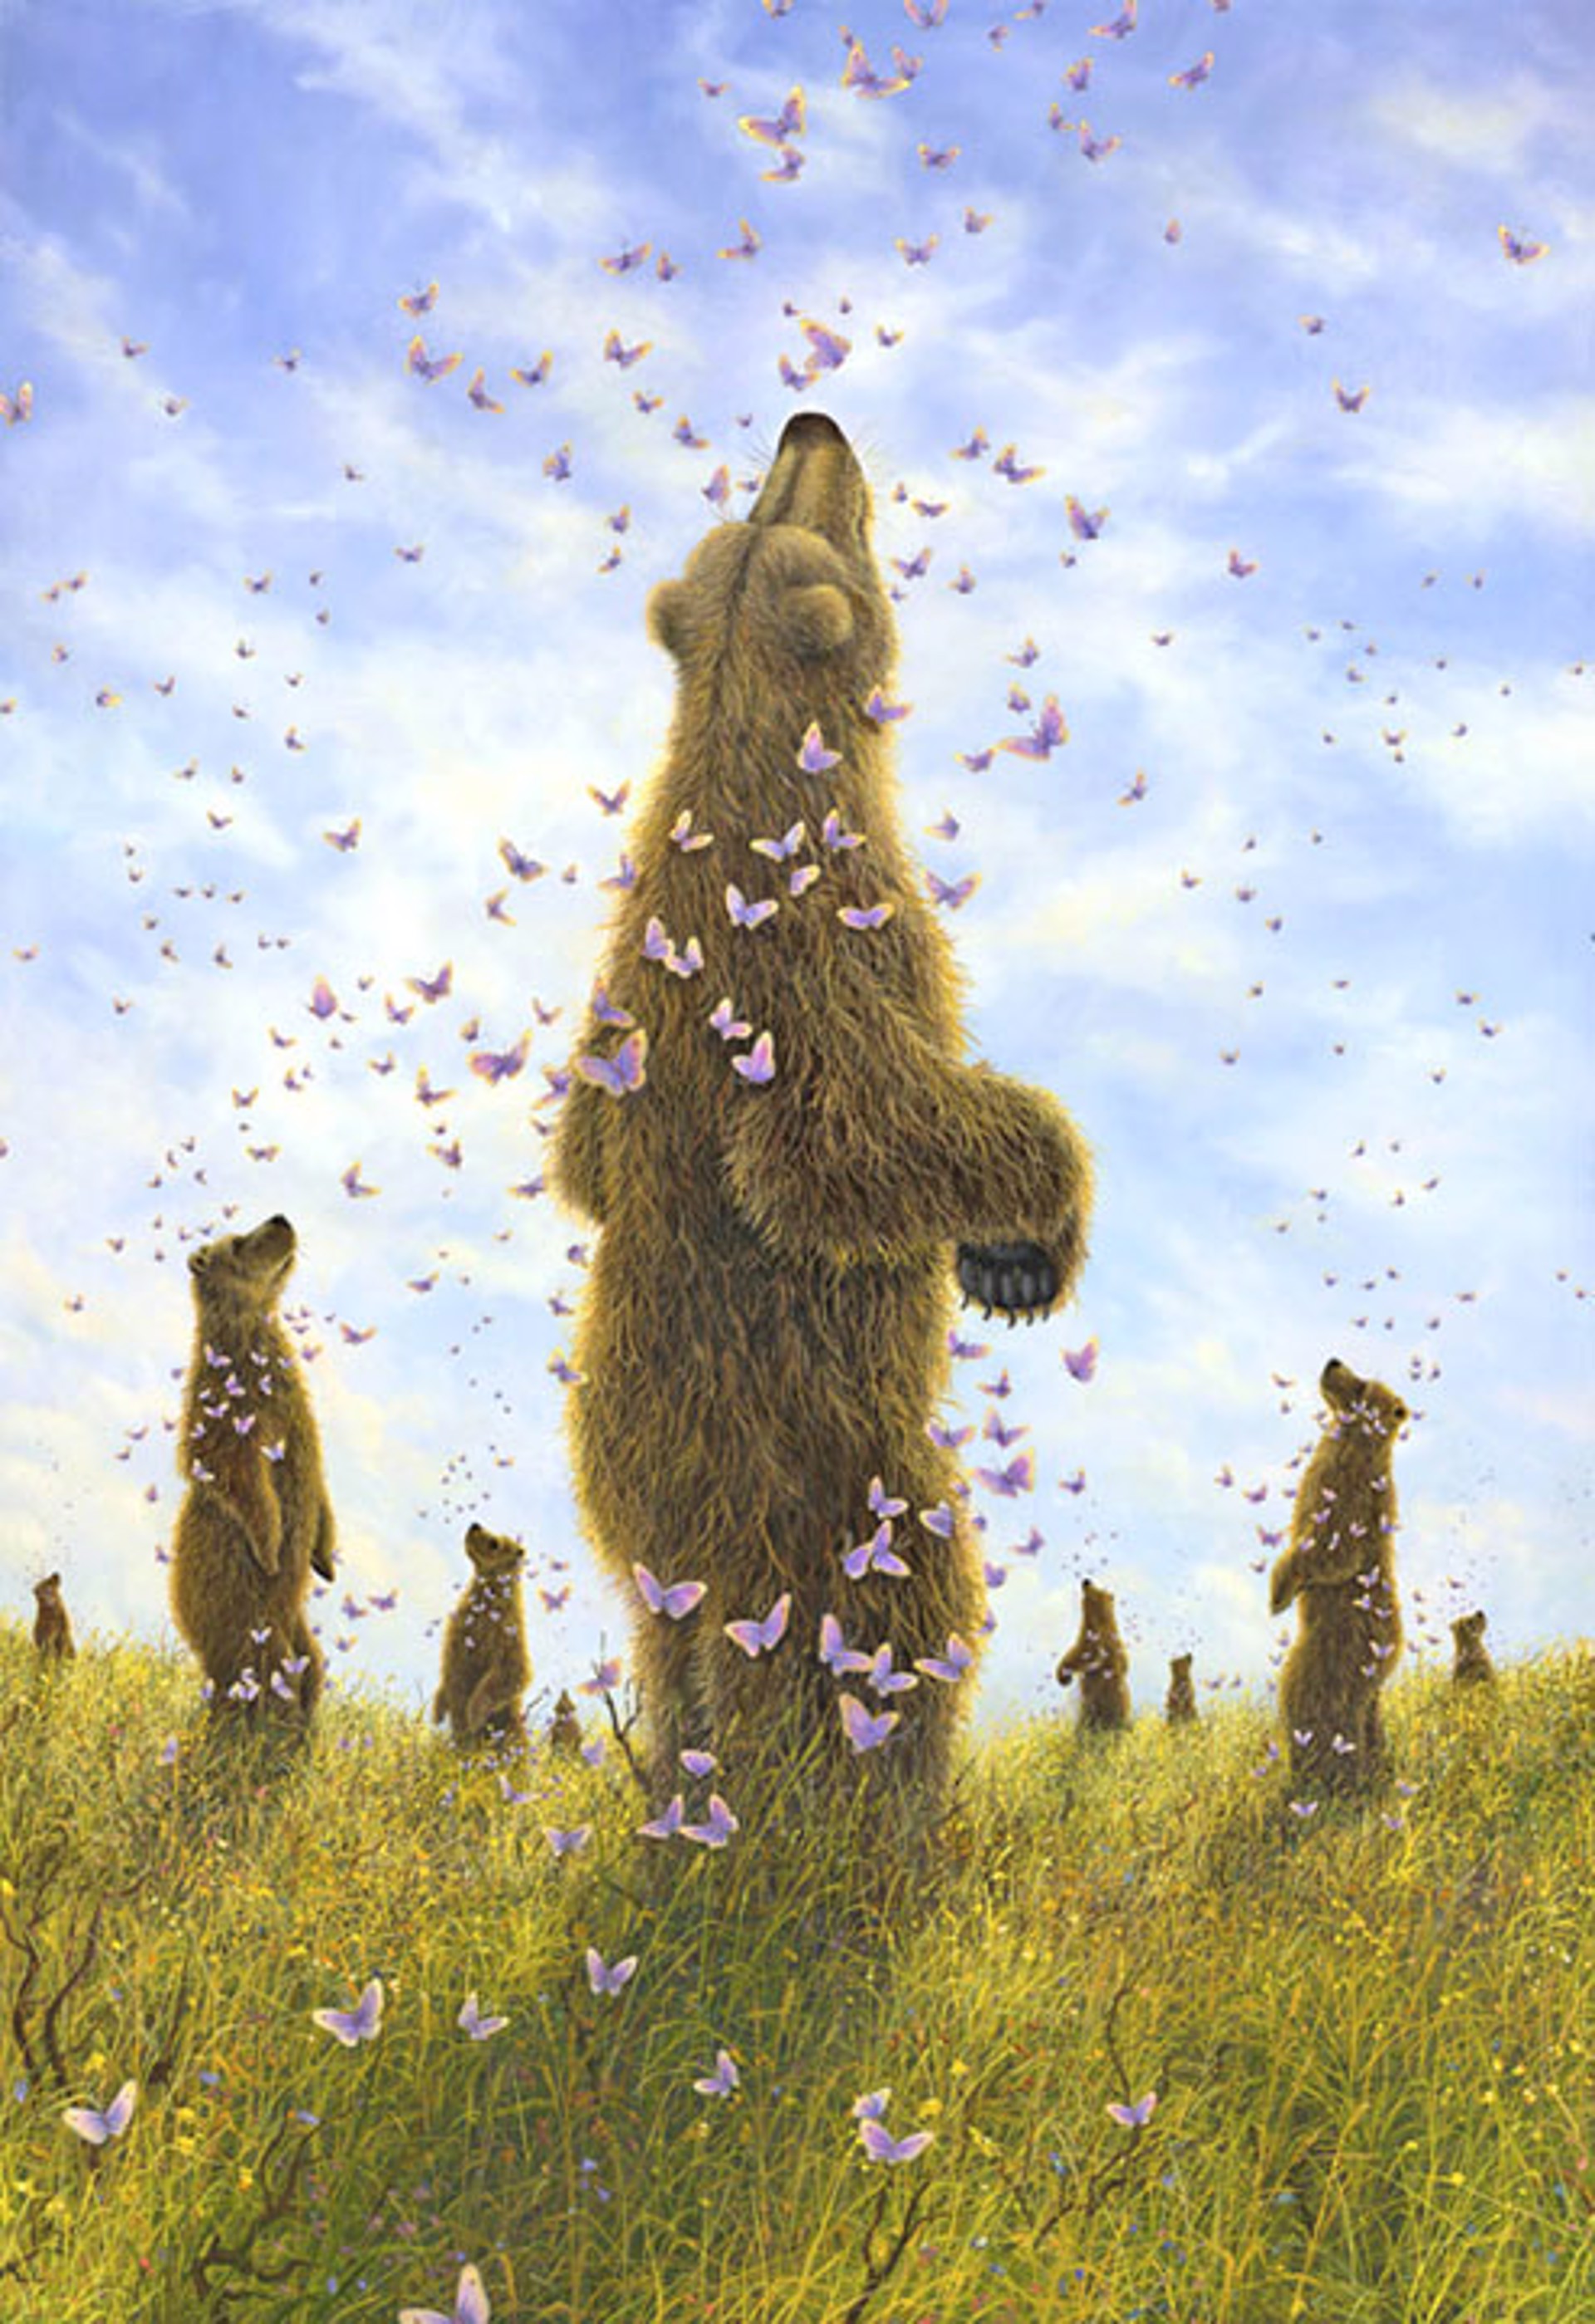 The Enchantment by Robert Bissell